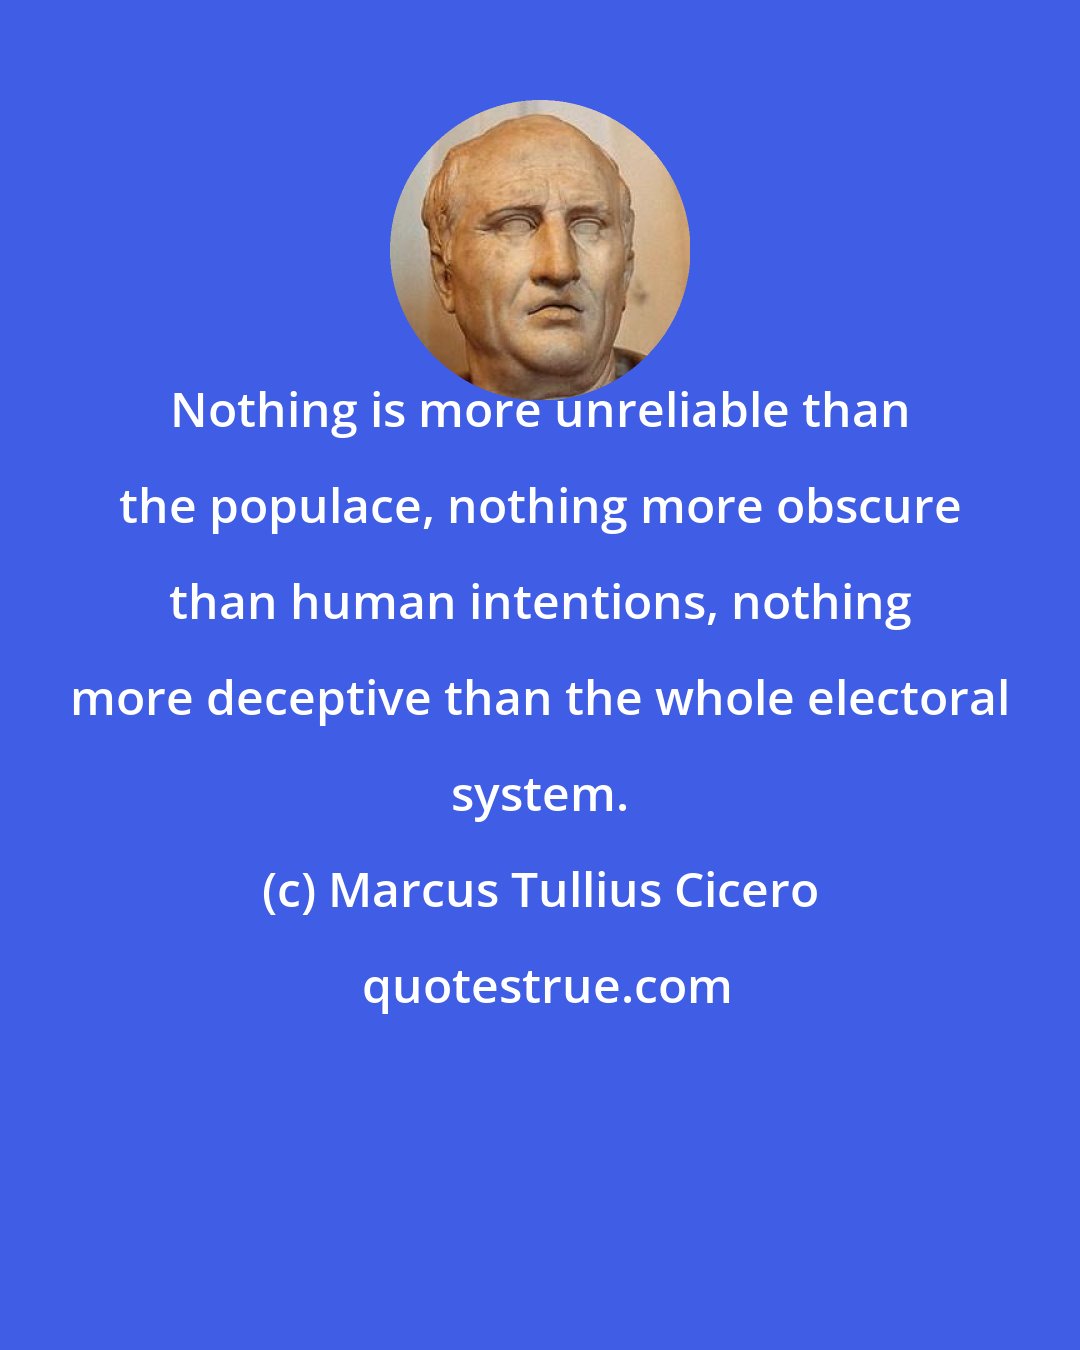 Marcus Tullius Cicero: Nothing is more unreliable than the populace, nothing more obscure than human intentions, nothing more deceptive than the whole electoral system.